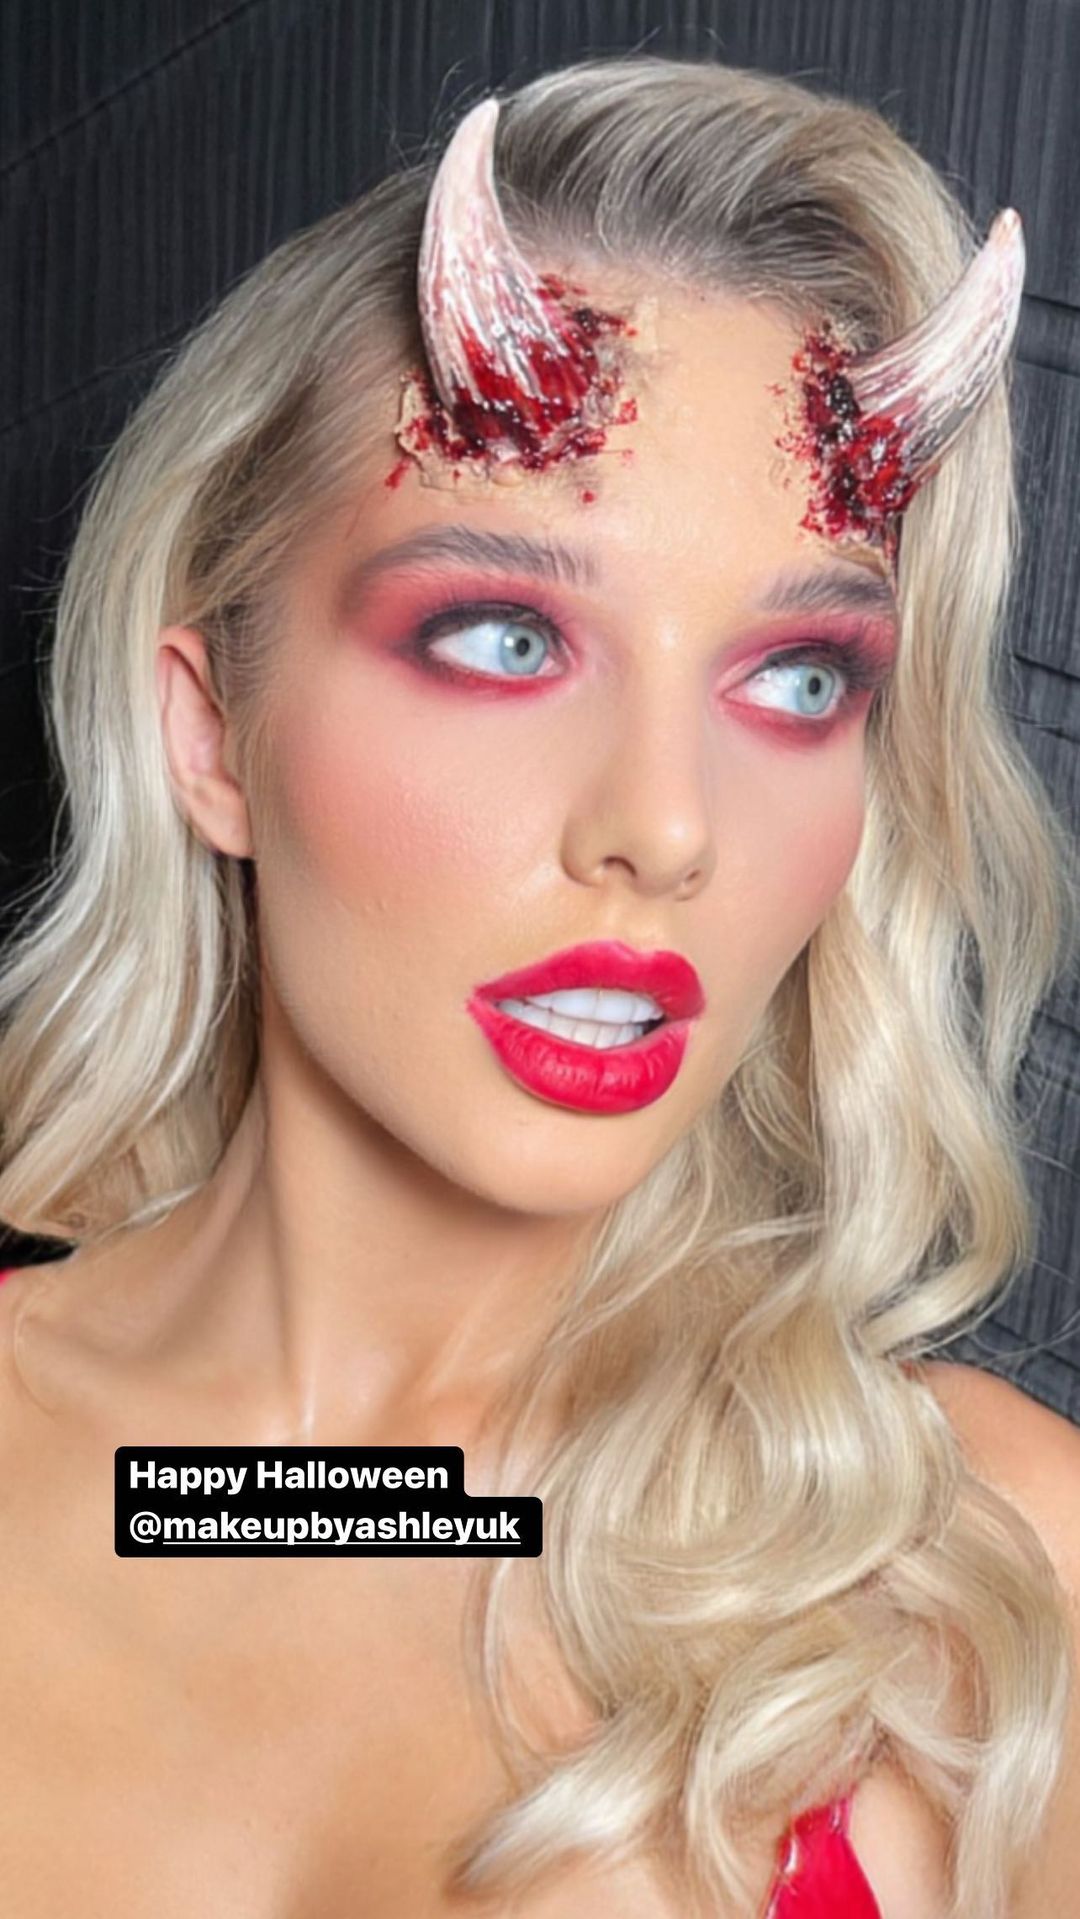 Make-up free Helen Flanagan flashes her ring-free hand after Halloween night out